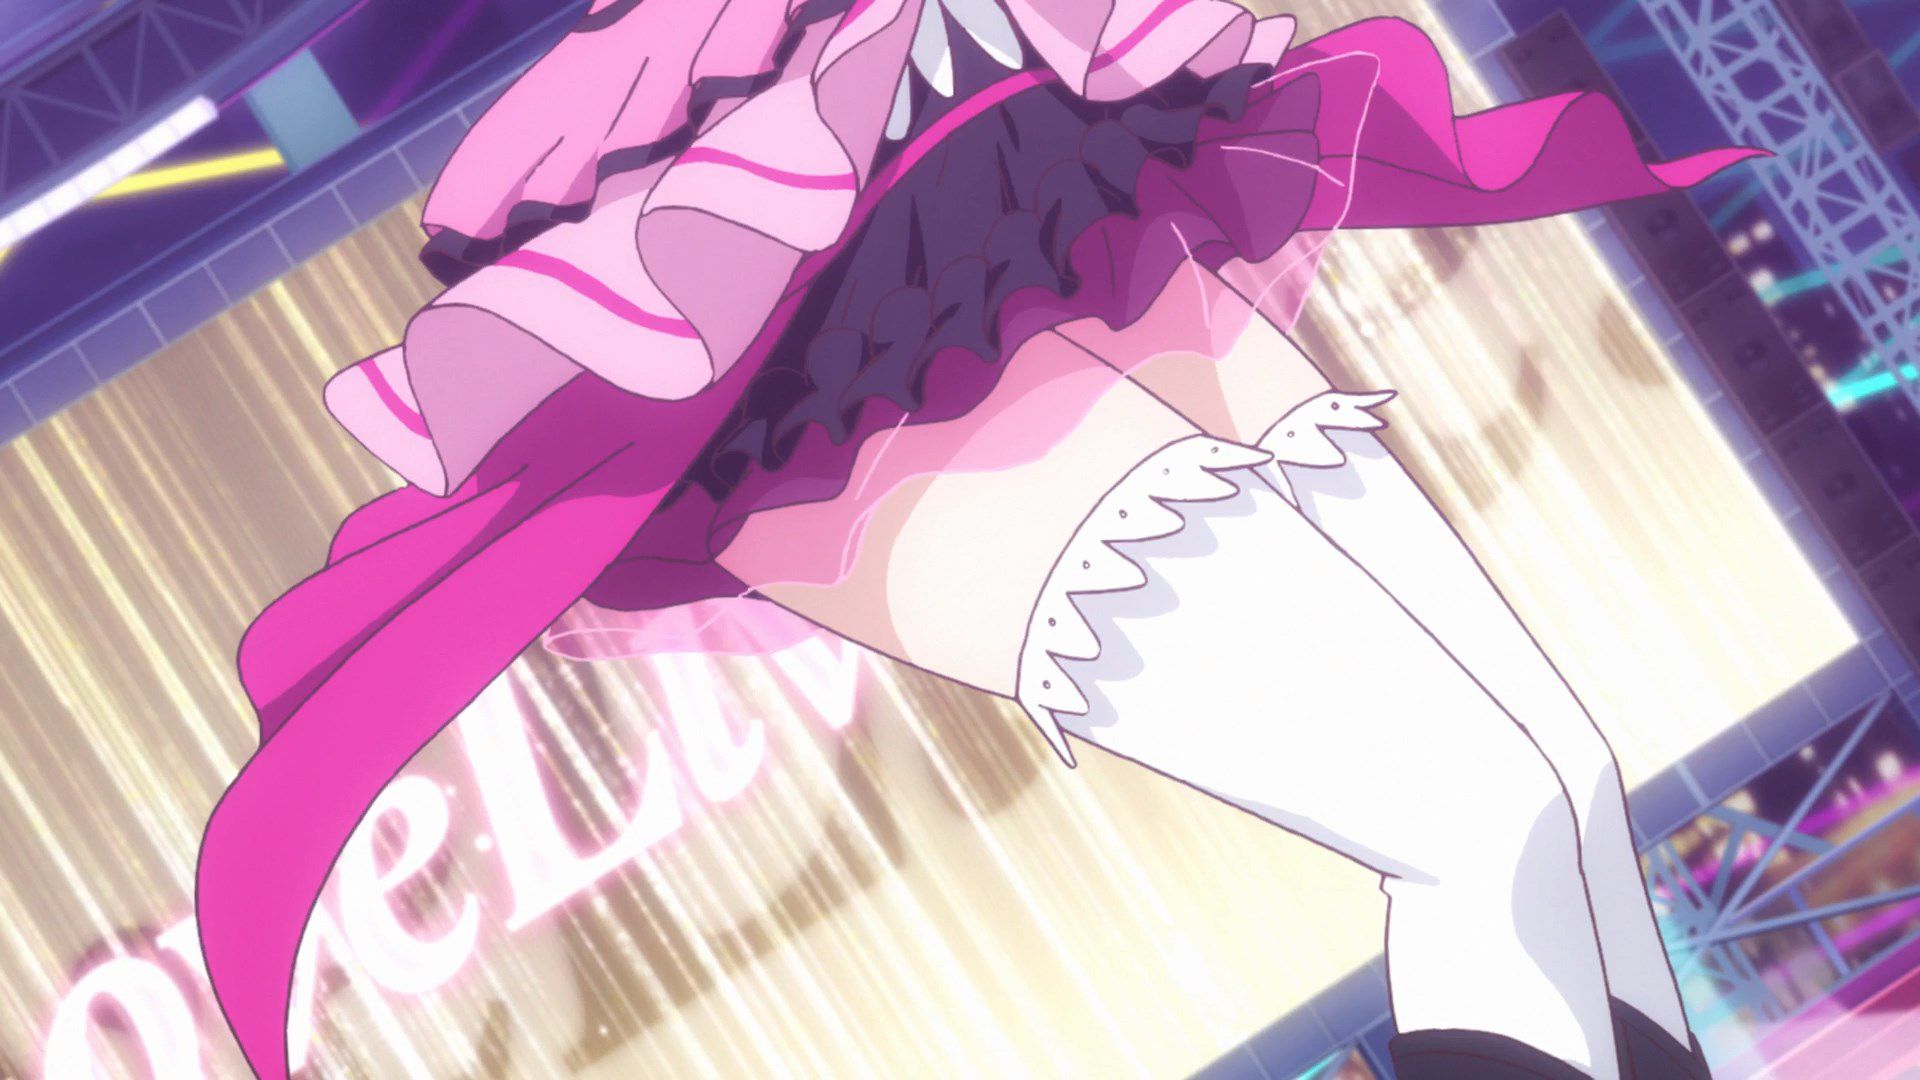 [God images] "love live! ' Μm ' PV's leg is too erotic everyone wakes up to a leg fetish of wwwww 75